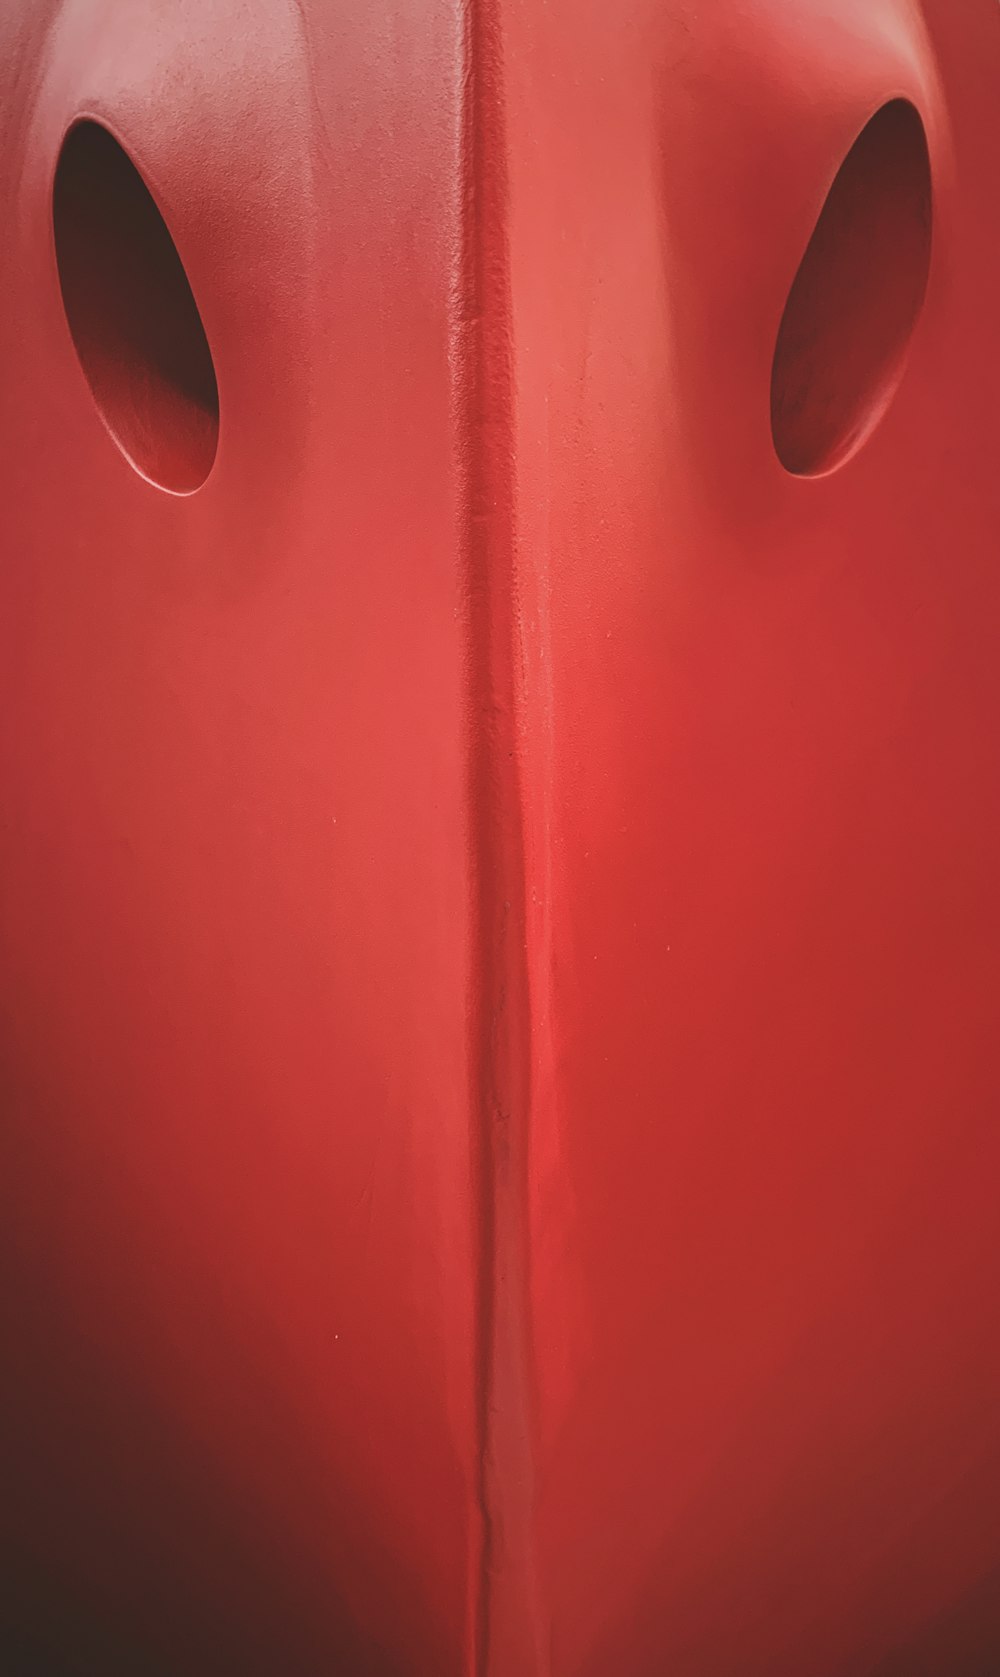 a close up of the side of a red boat